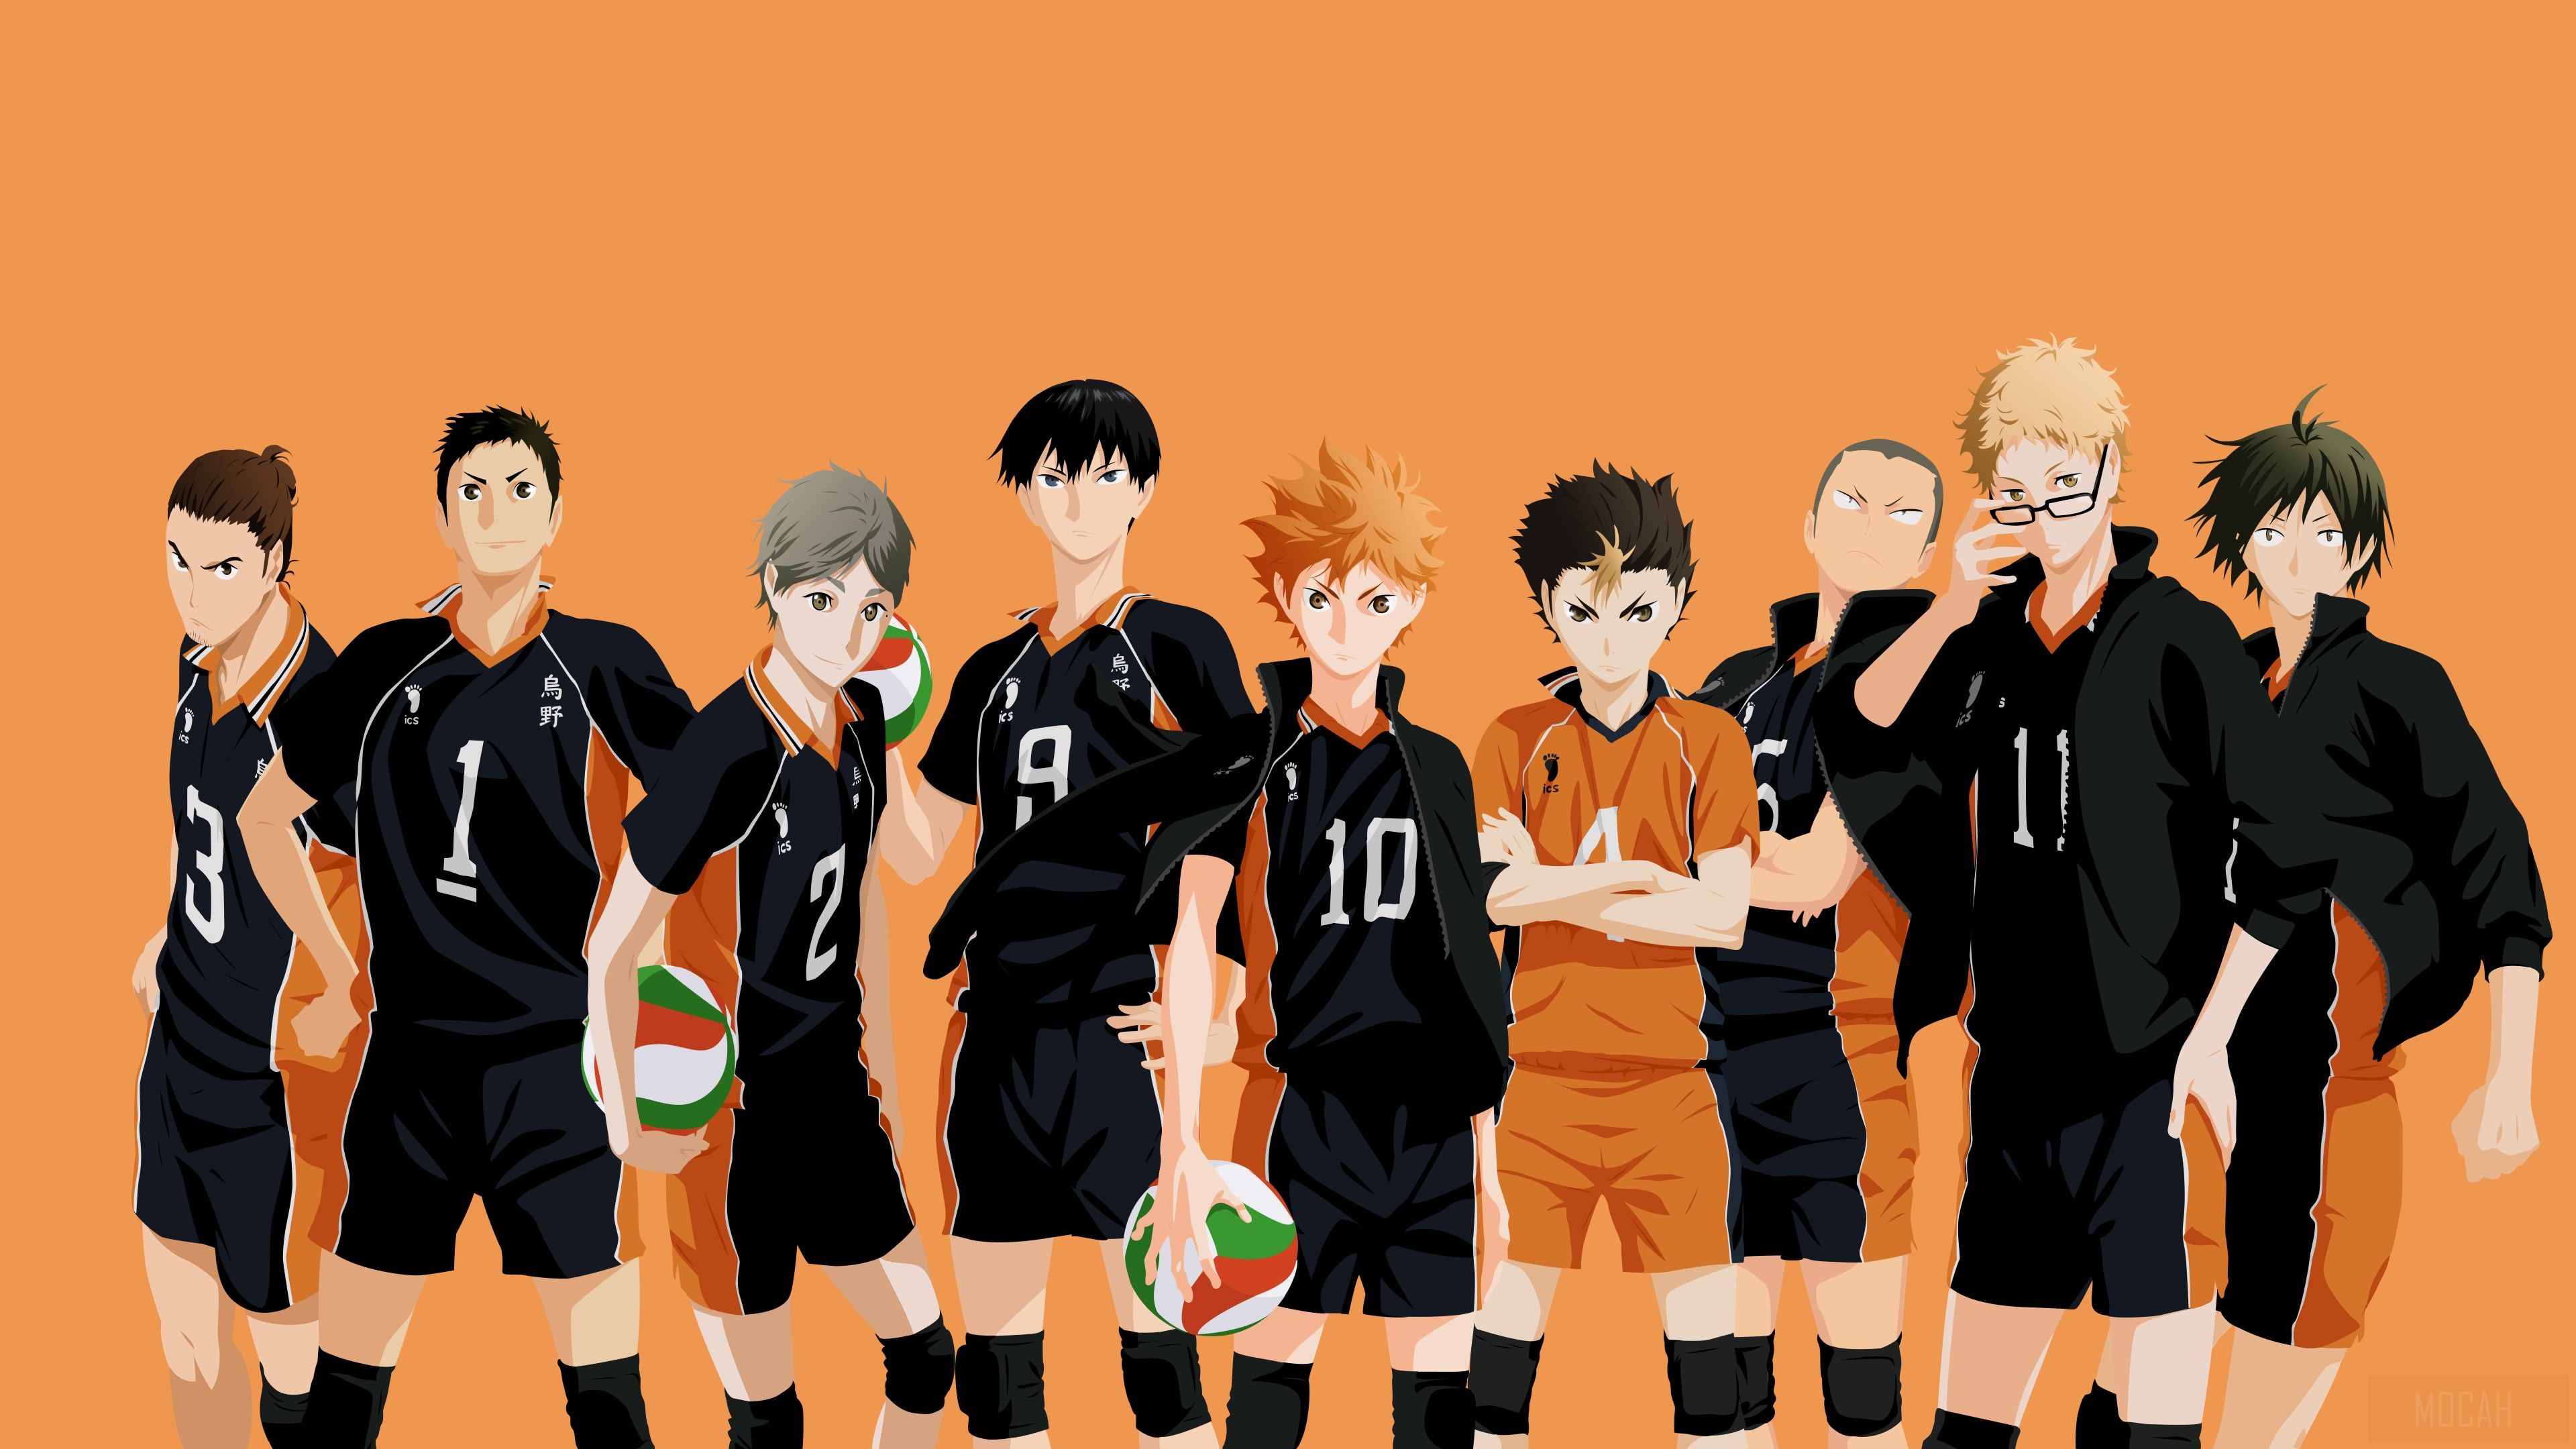 Anime wallpaper of the week 10 - Volleyball